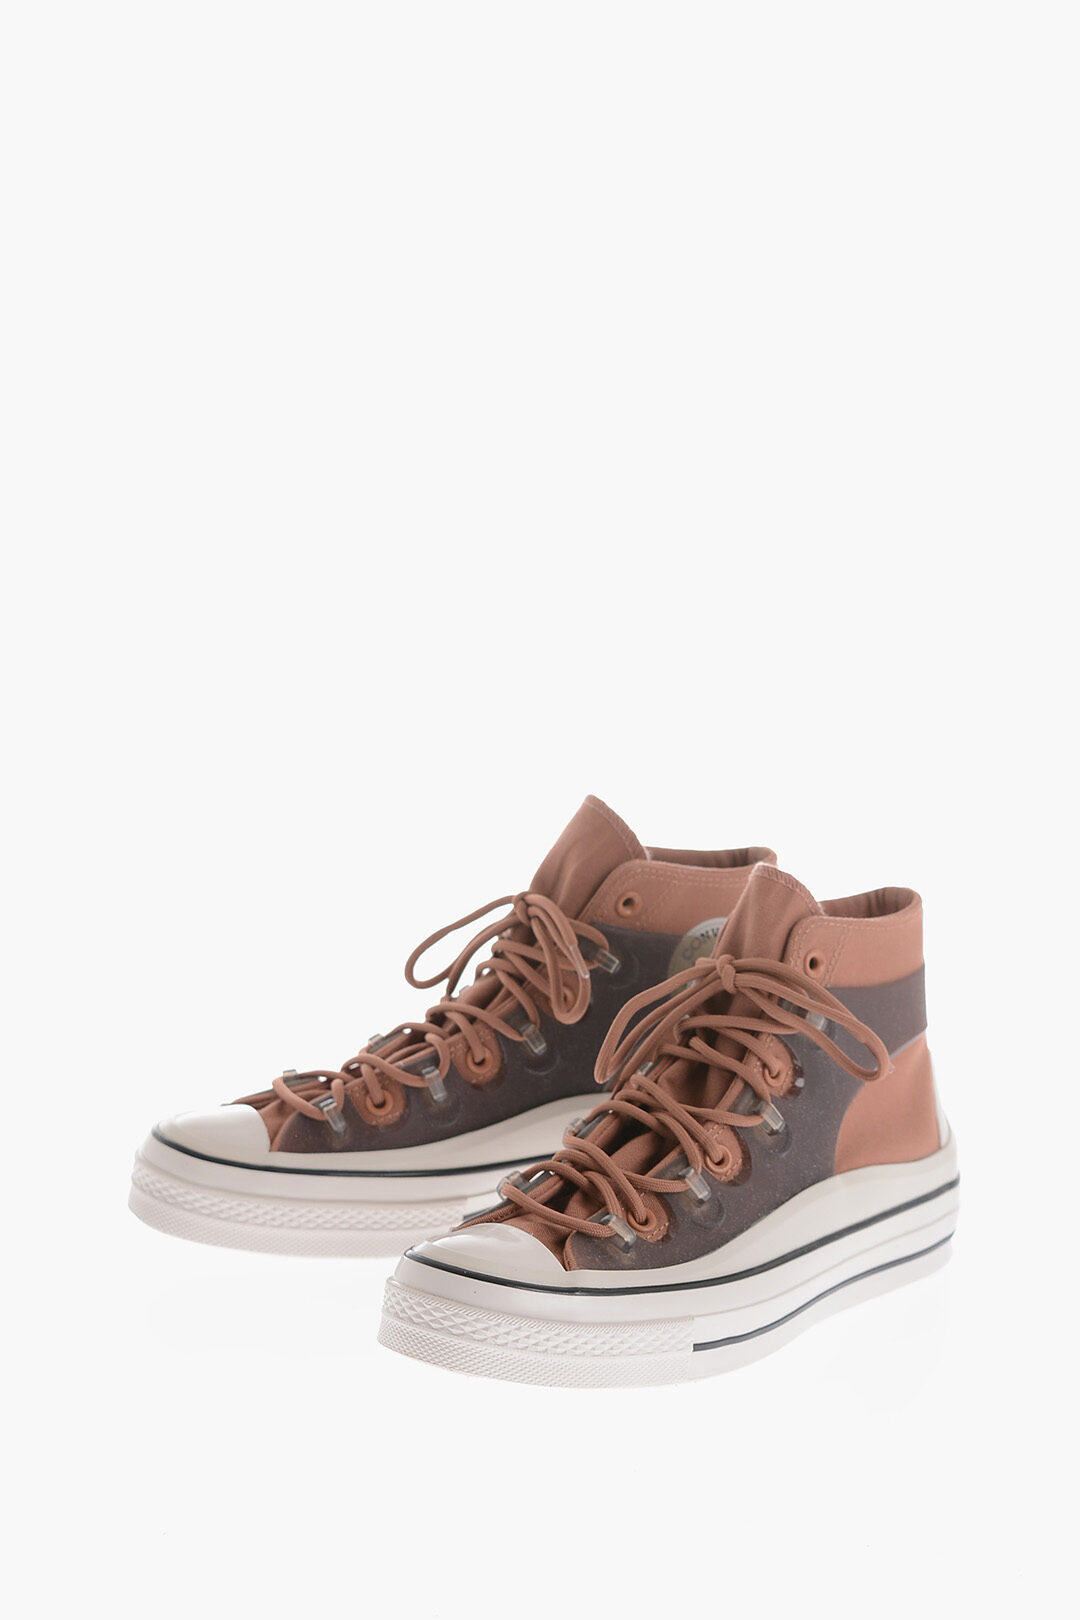 Converse ALL CHUCK TAYLOR and Plastic 70 UTILITY High-Top Sneakers with Braided Laces men - Glamood